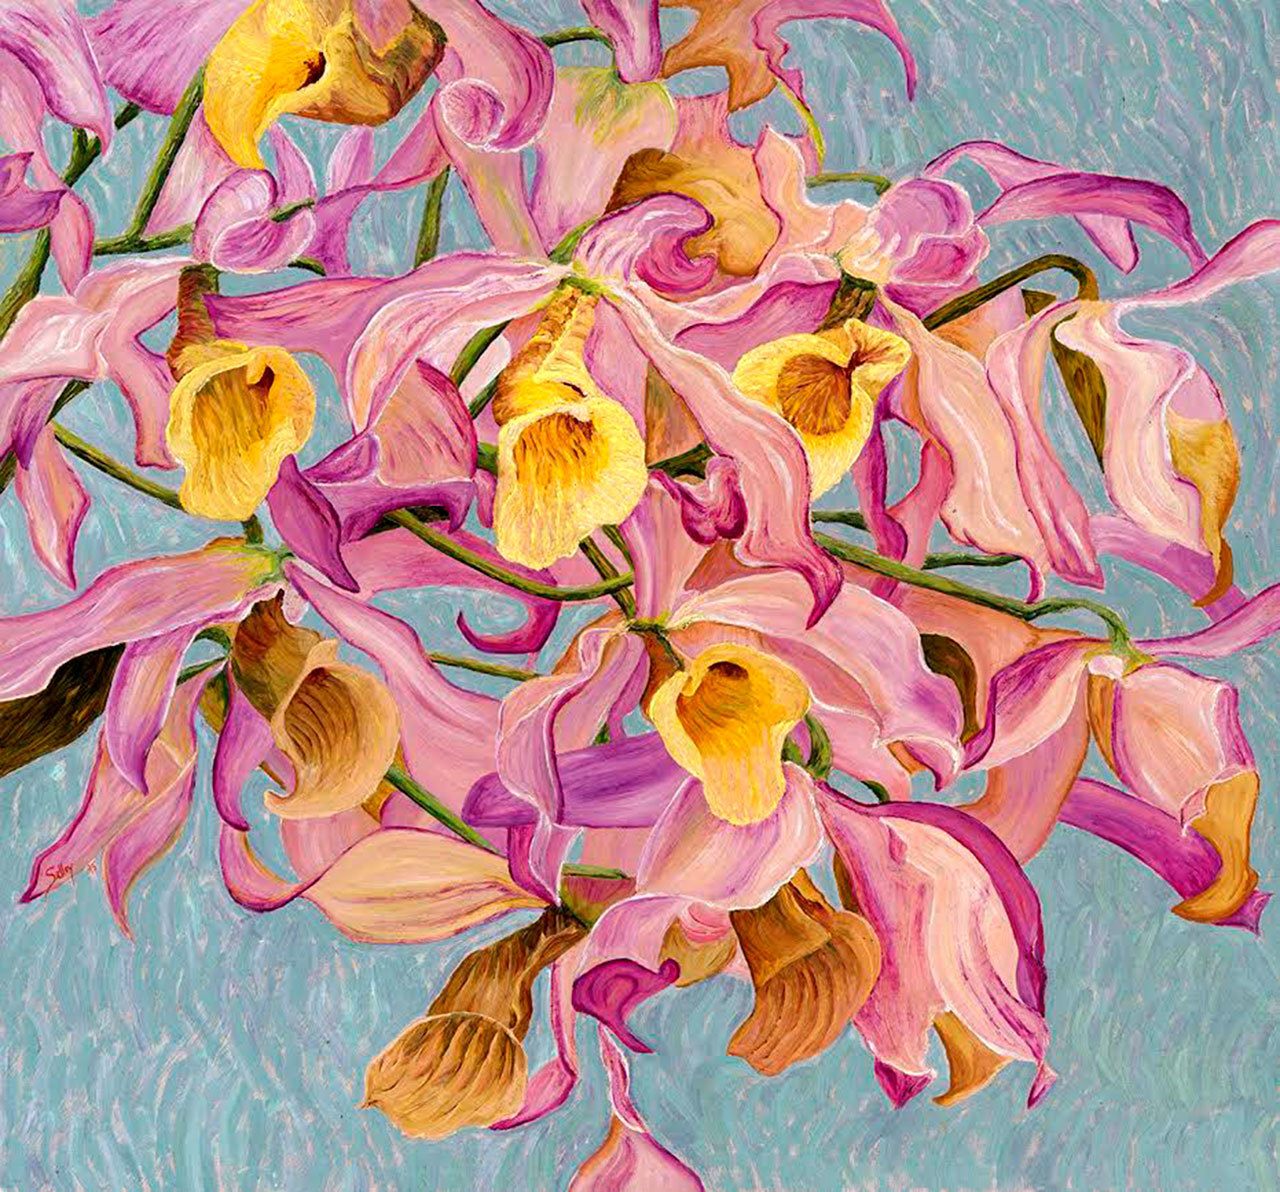 “Wedding Bells” is a floral painting by Douglas Selley Byrd on view at Gallery 9 in Port Townsend.